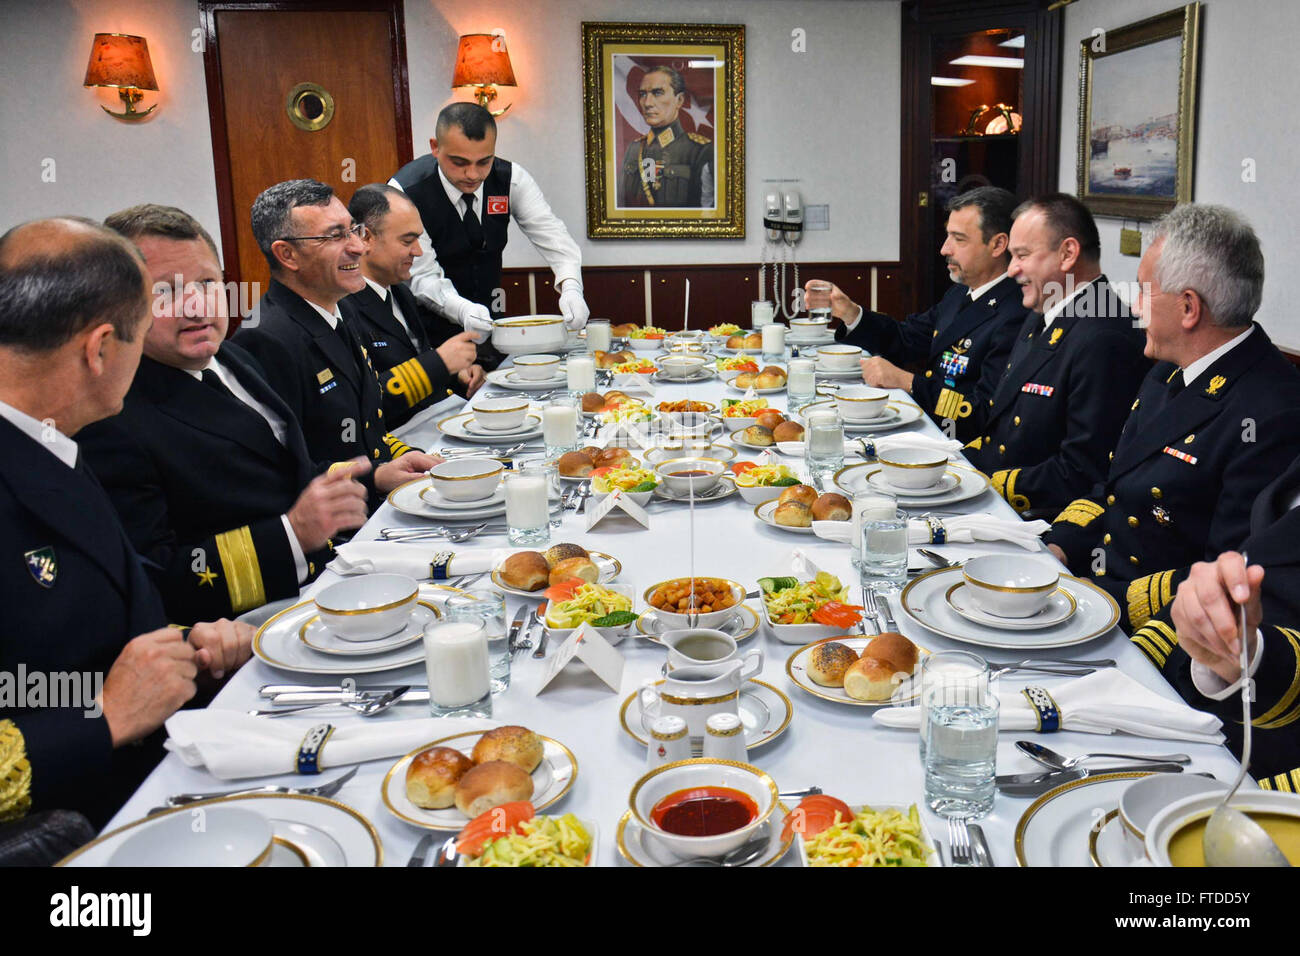 150605-N-IY633-105 GDYNIA, Poland (June 5, 2015) – Standing NATO Maritime Group 2 (SNMG2) and Polish Armed Forces leadership enjoy lunch aboard SNMG2 Turkish ship TCG Göksu (F 497) during SNMG2’s port visit to the city in preparation for exercise Baltic Operations (BALTOPS). BALTOPS is an annually reoccurring multinational exercise designed to enhance flexibility and interoperability, as well as demonstrate resolve of Allied and partner forces to defend the Baltic region. (U.S. Navy photo by Mass Communication Specialist 2nd Class Amanda S. Kitchner/Released) Stock Photo